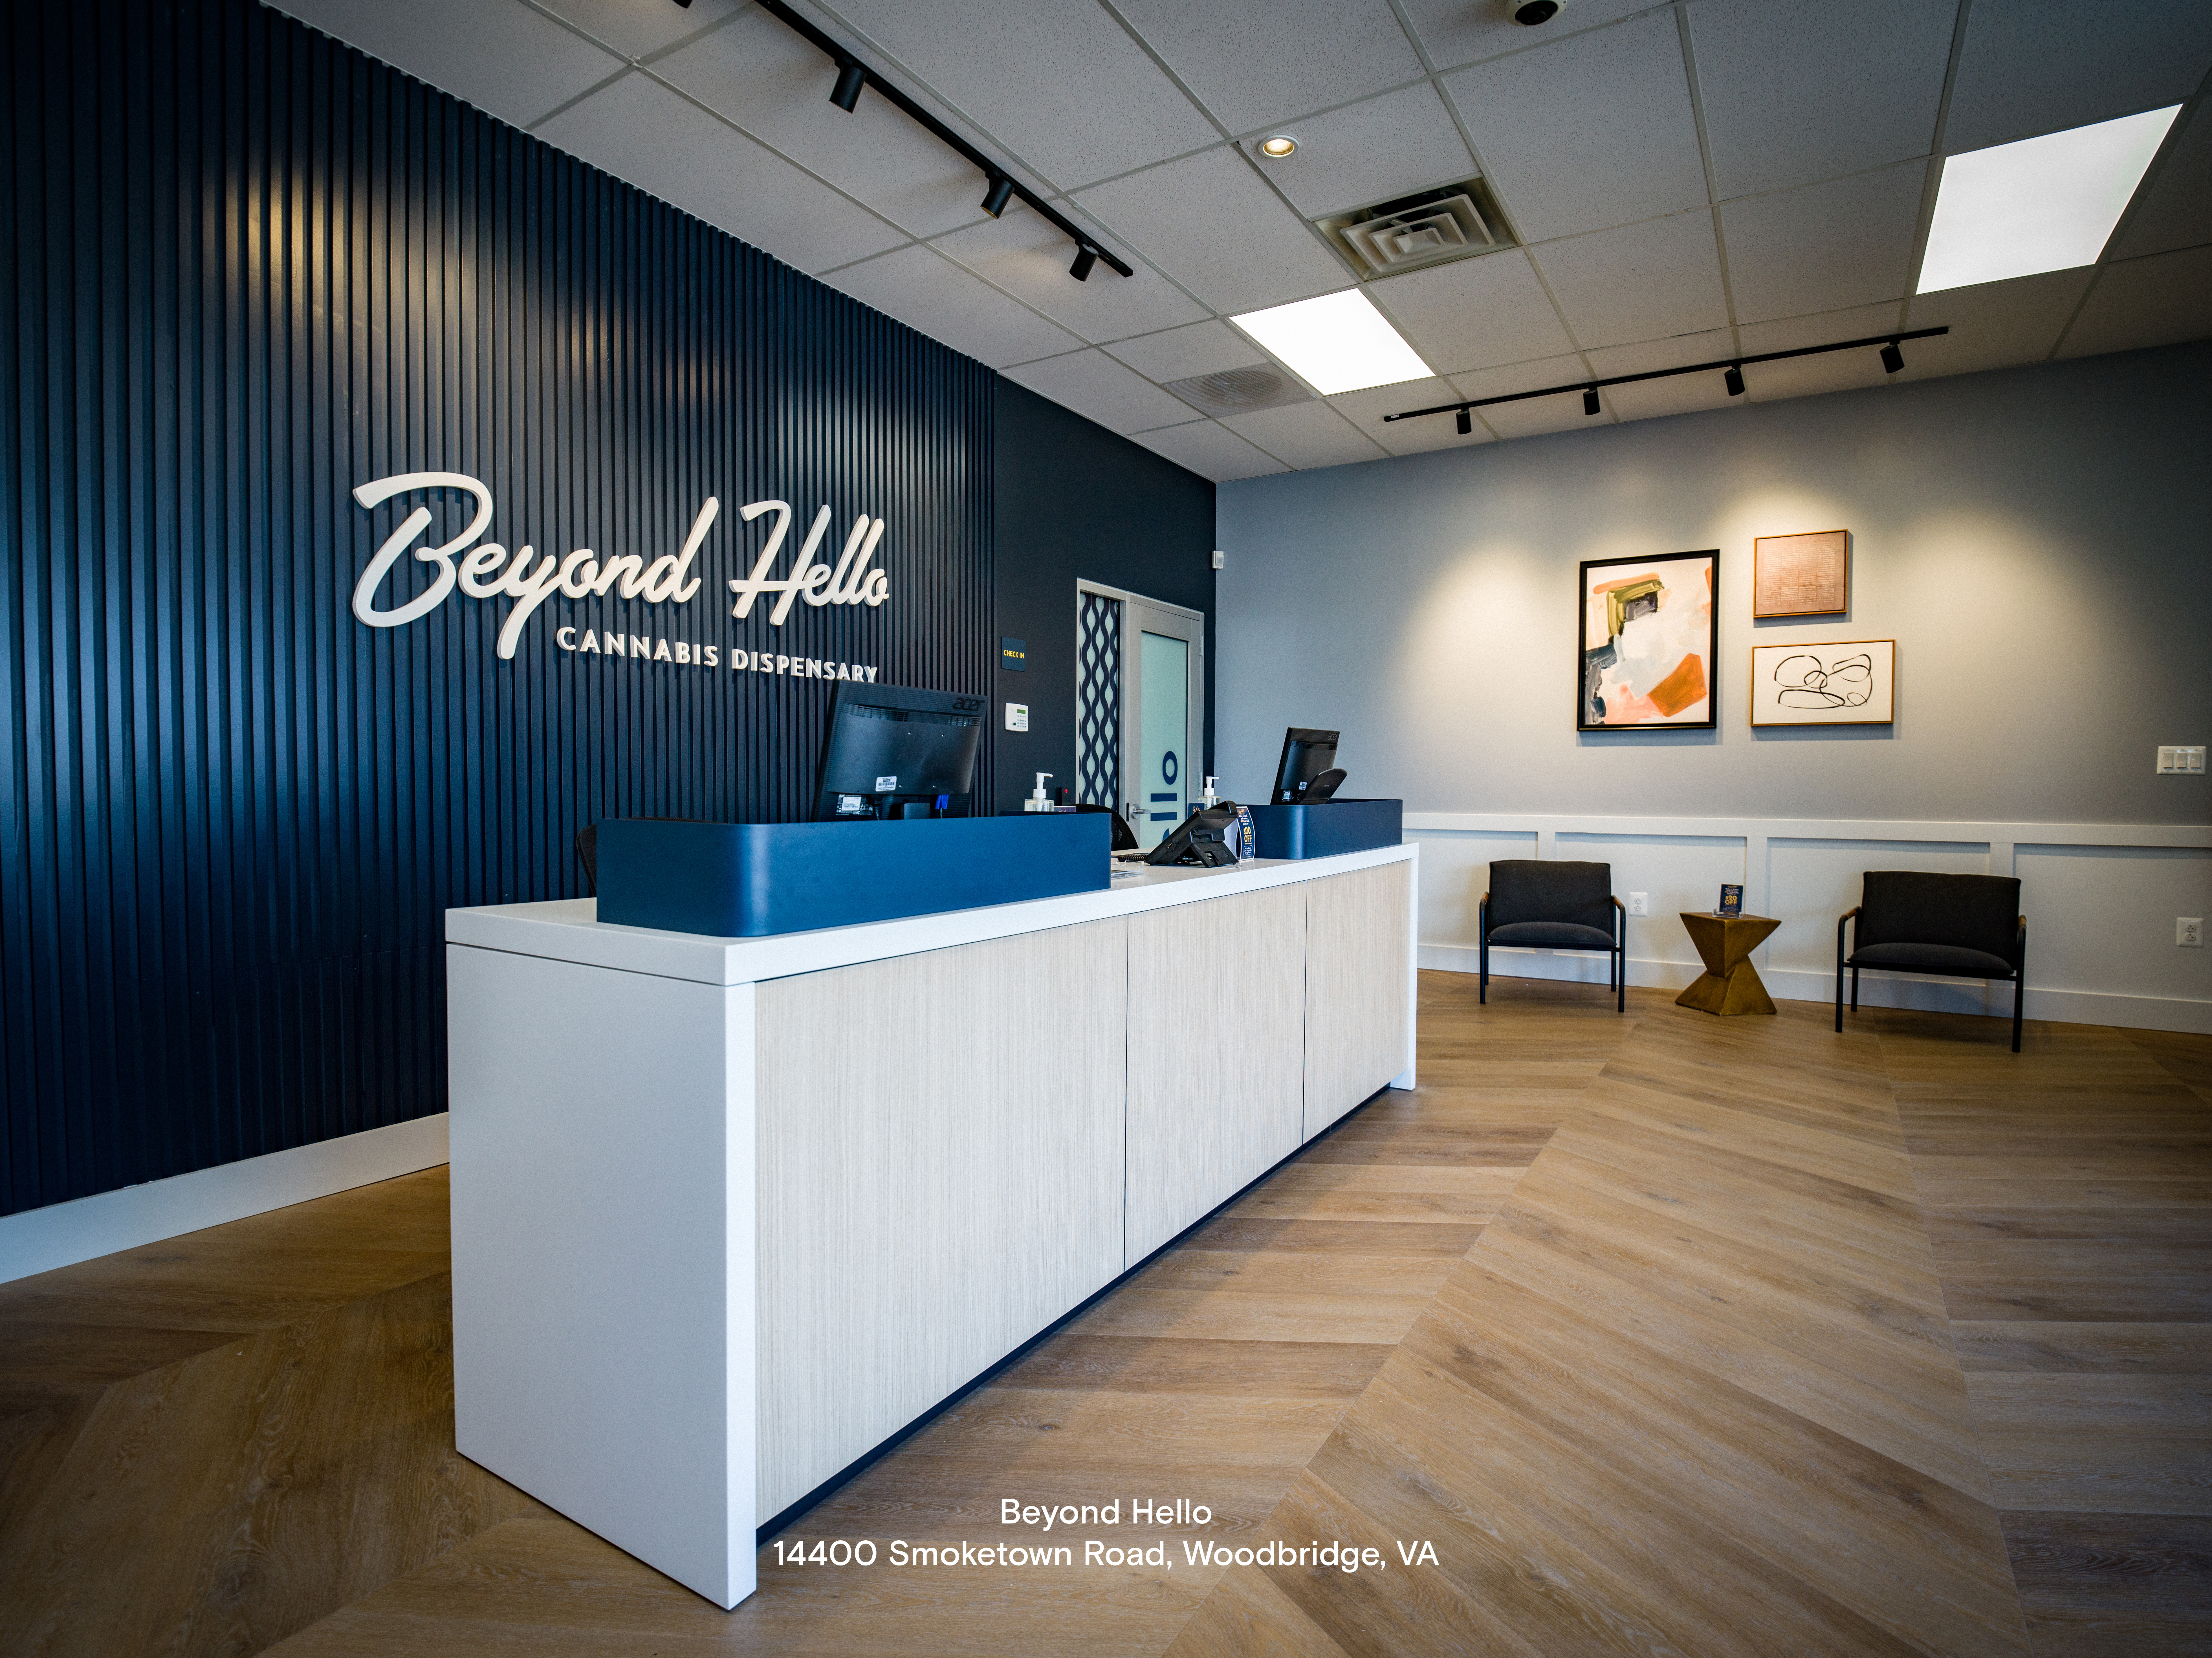 Located in Prince William County in a suburban community just outside of Washington, D.C. and situated along the Potomac River, Beyond Hello™ Woodbridge will begin serving Virginia medical cannabis patients and registered agents on Wednesday, August 23rd at 10:00 a.m. The dispensary will be open daily Monday through Saturday from 10:00 a.m. to 8:00 p.m., and on Sundays from 10:00 a.m. to 6:00 p.m.